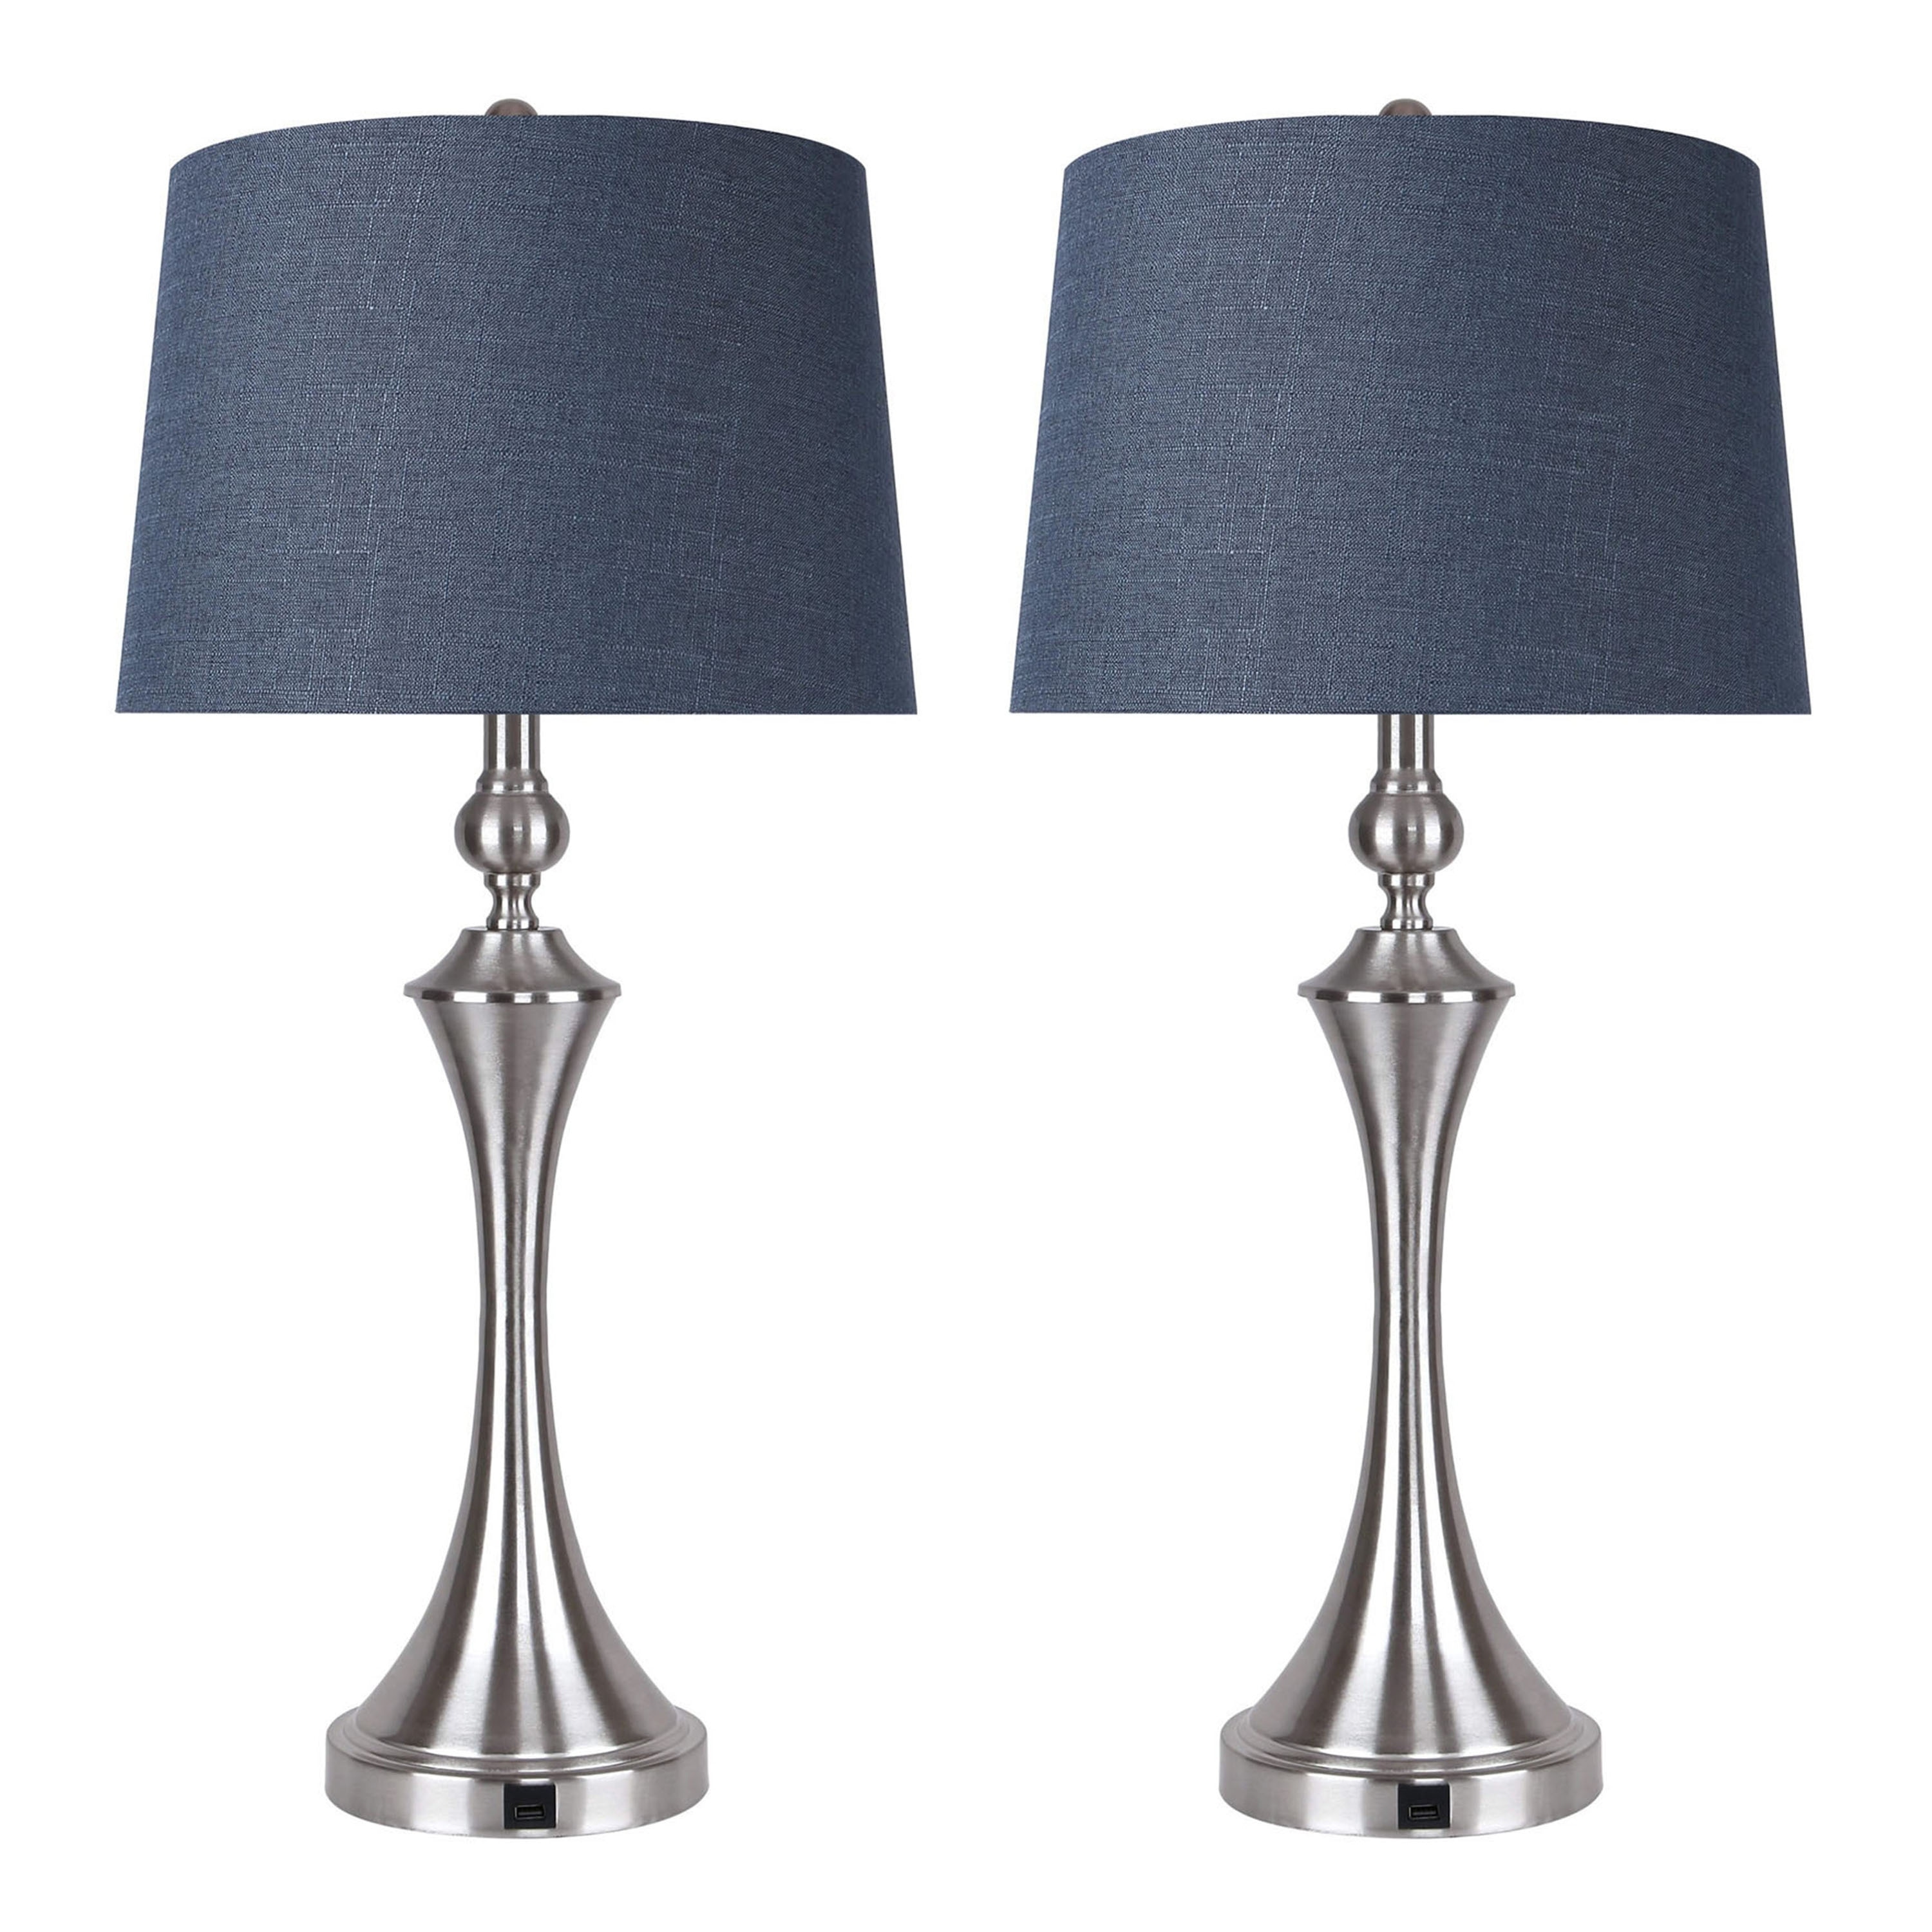 Flint 30.75" Metal Table Lamp with USB (Set of 2)